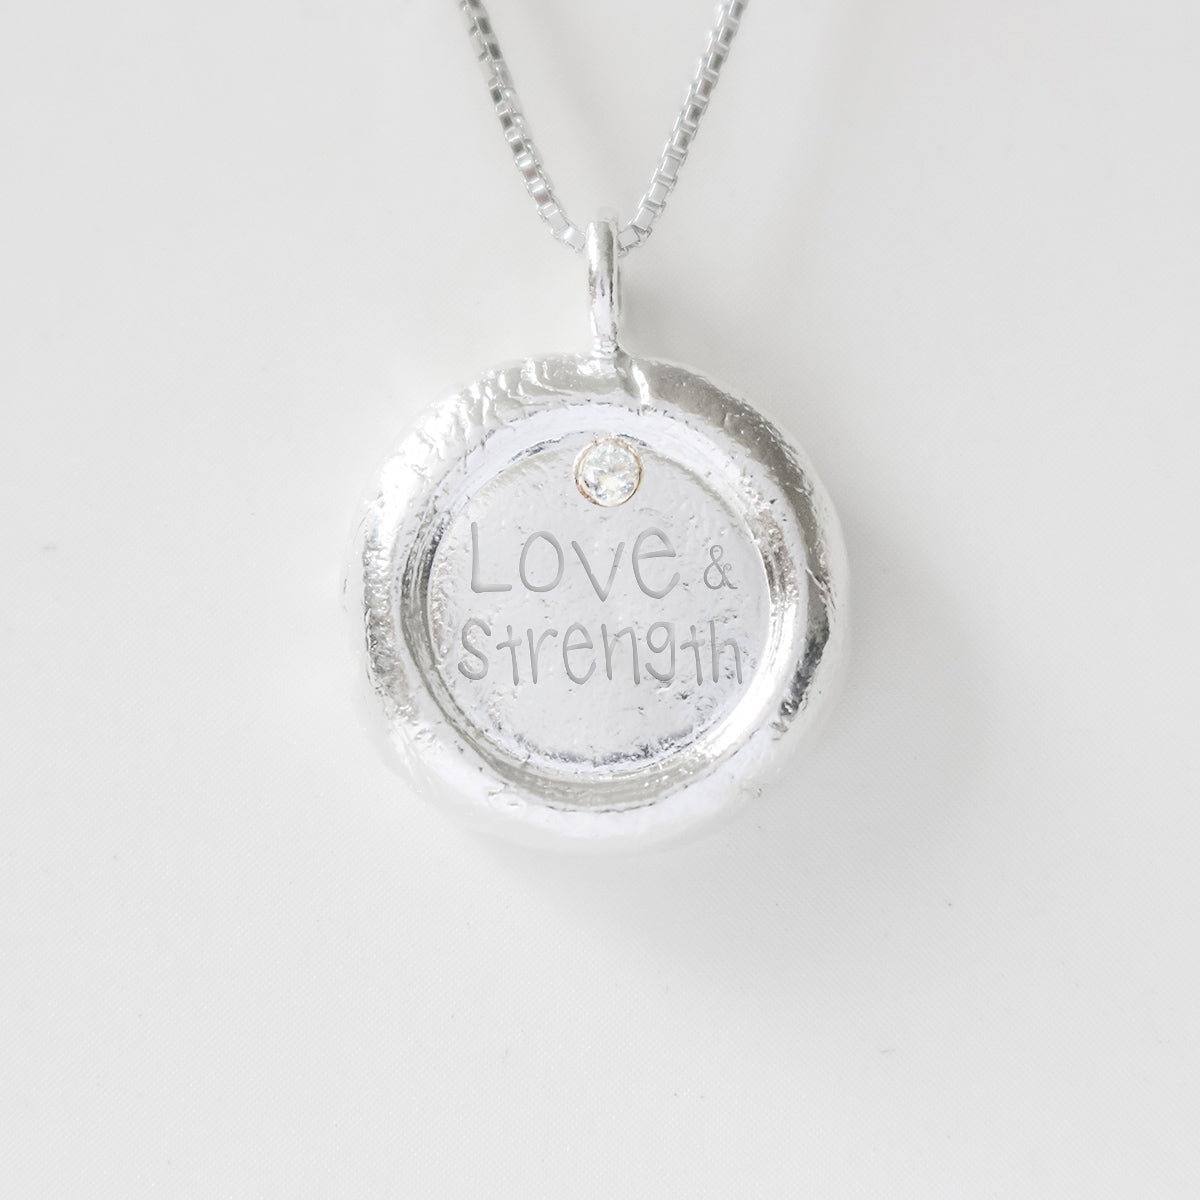 Love and Strength - Empowerment Diamond Silver Necklace